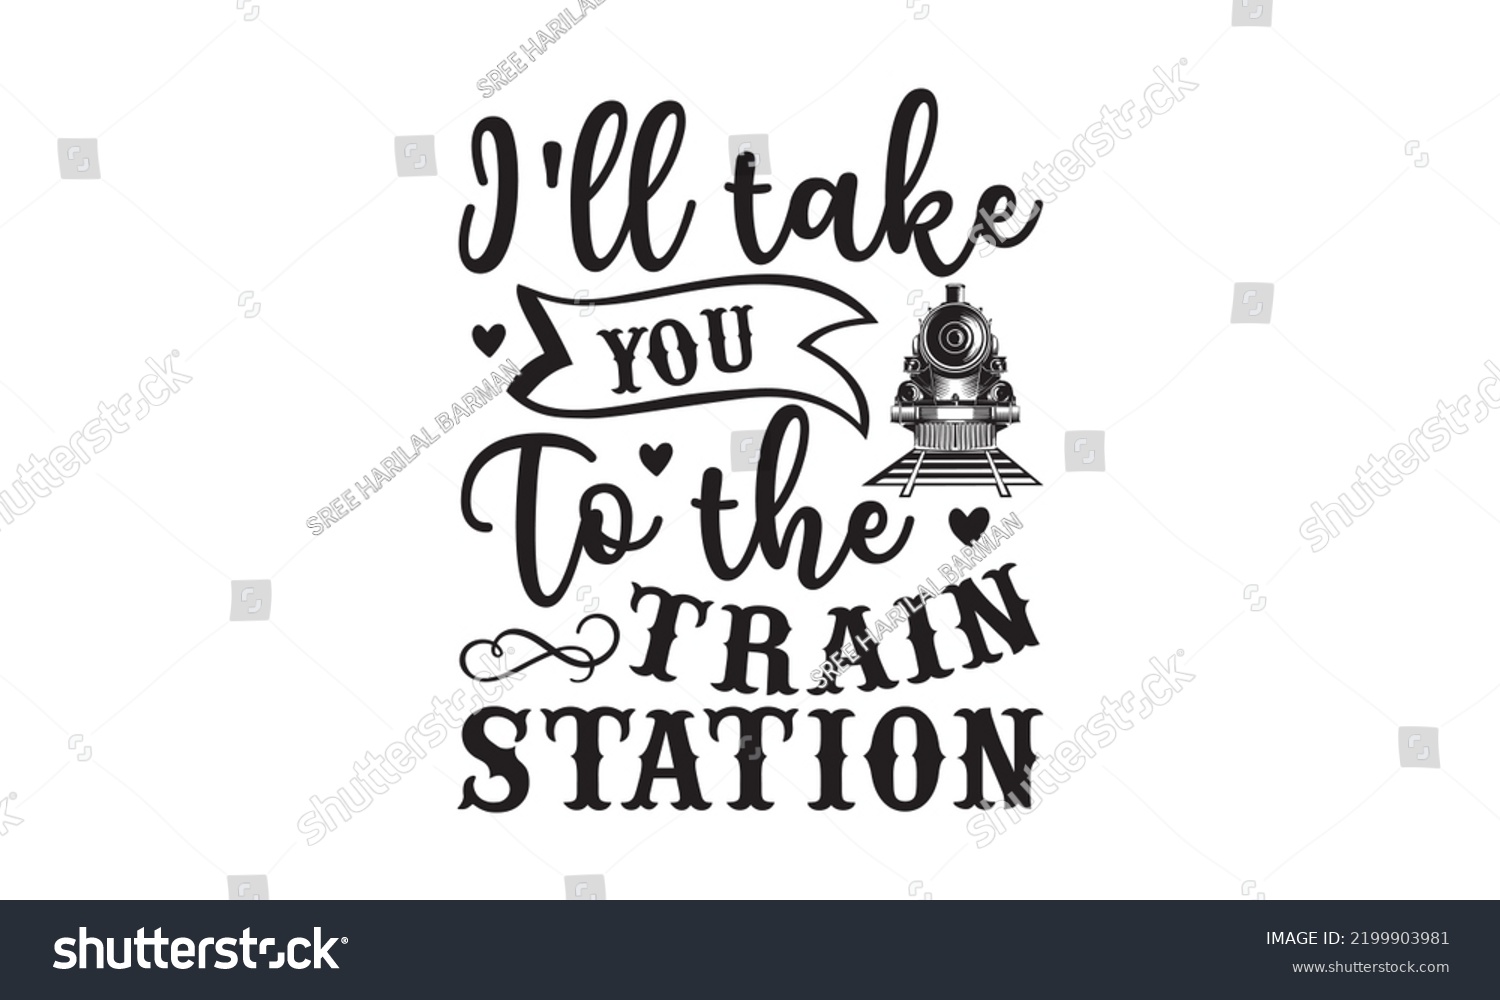 SVG of I’ll take you to the train station - Train SVG t-shirt design, Hand drew lettering phrases, templet, Calligraphy graphic design, SVG Files for Cutting Cricut and Silhouette. Eps 10 svg